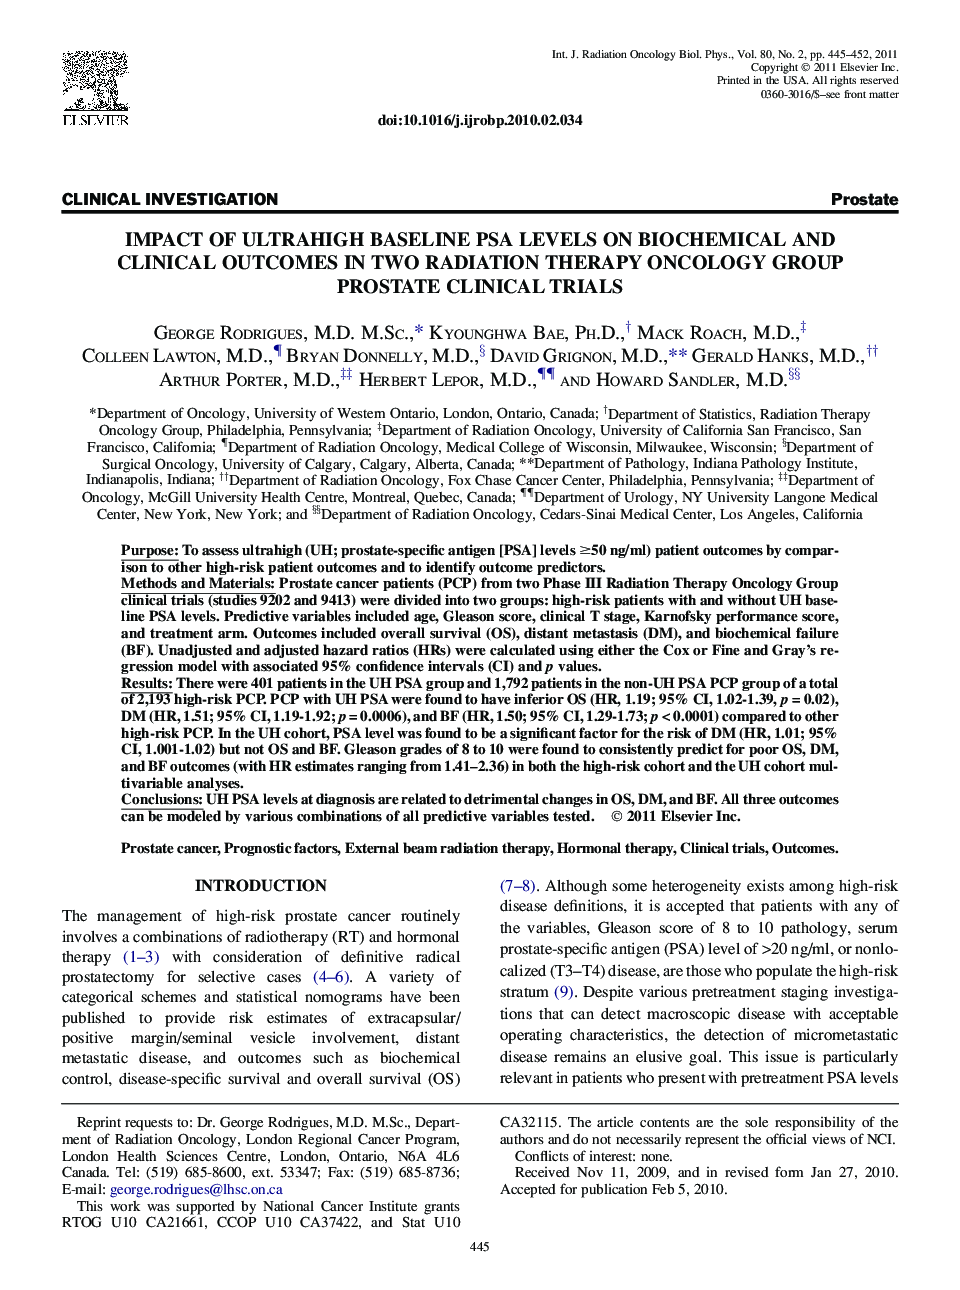 Impact of Ultrahigh Baseline PSA Levels on Biochemical and Clinical Outcomes in Two Radiation Therapy Oncology Group Prostate Clinical Trials